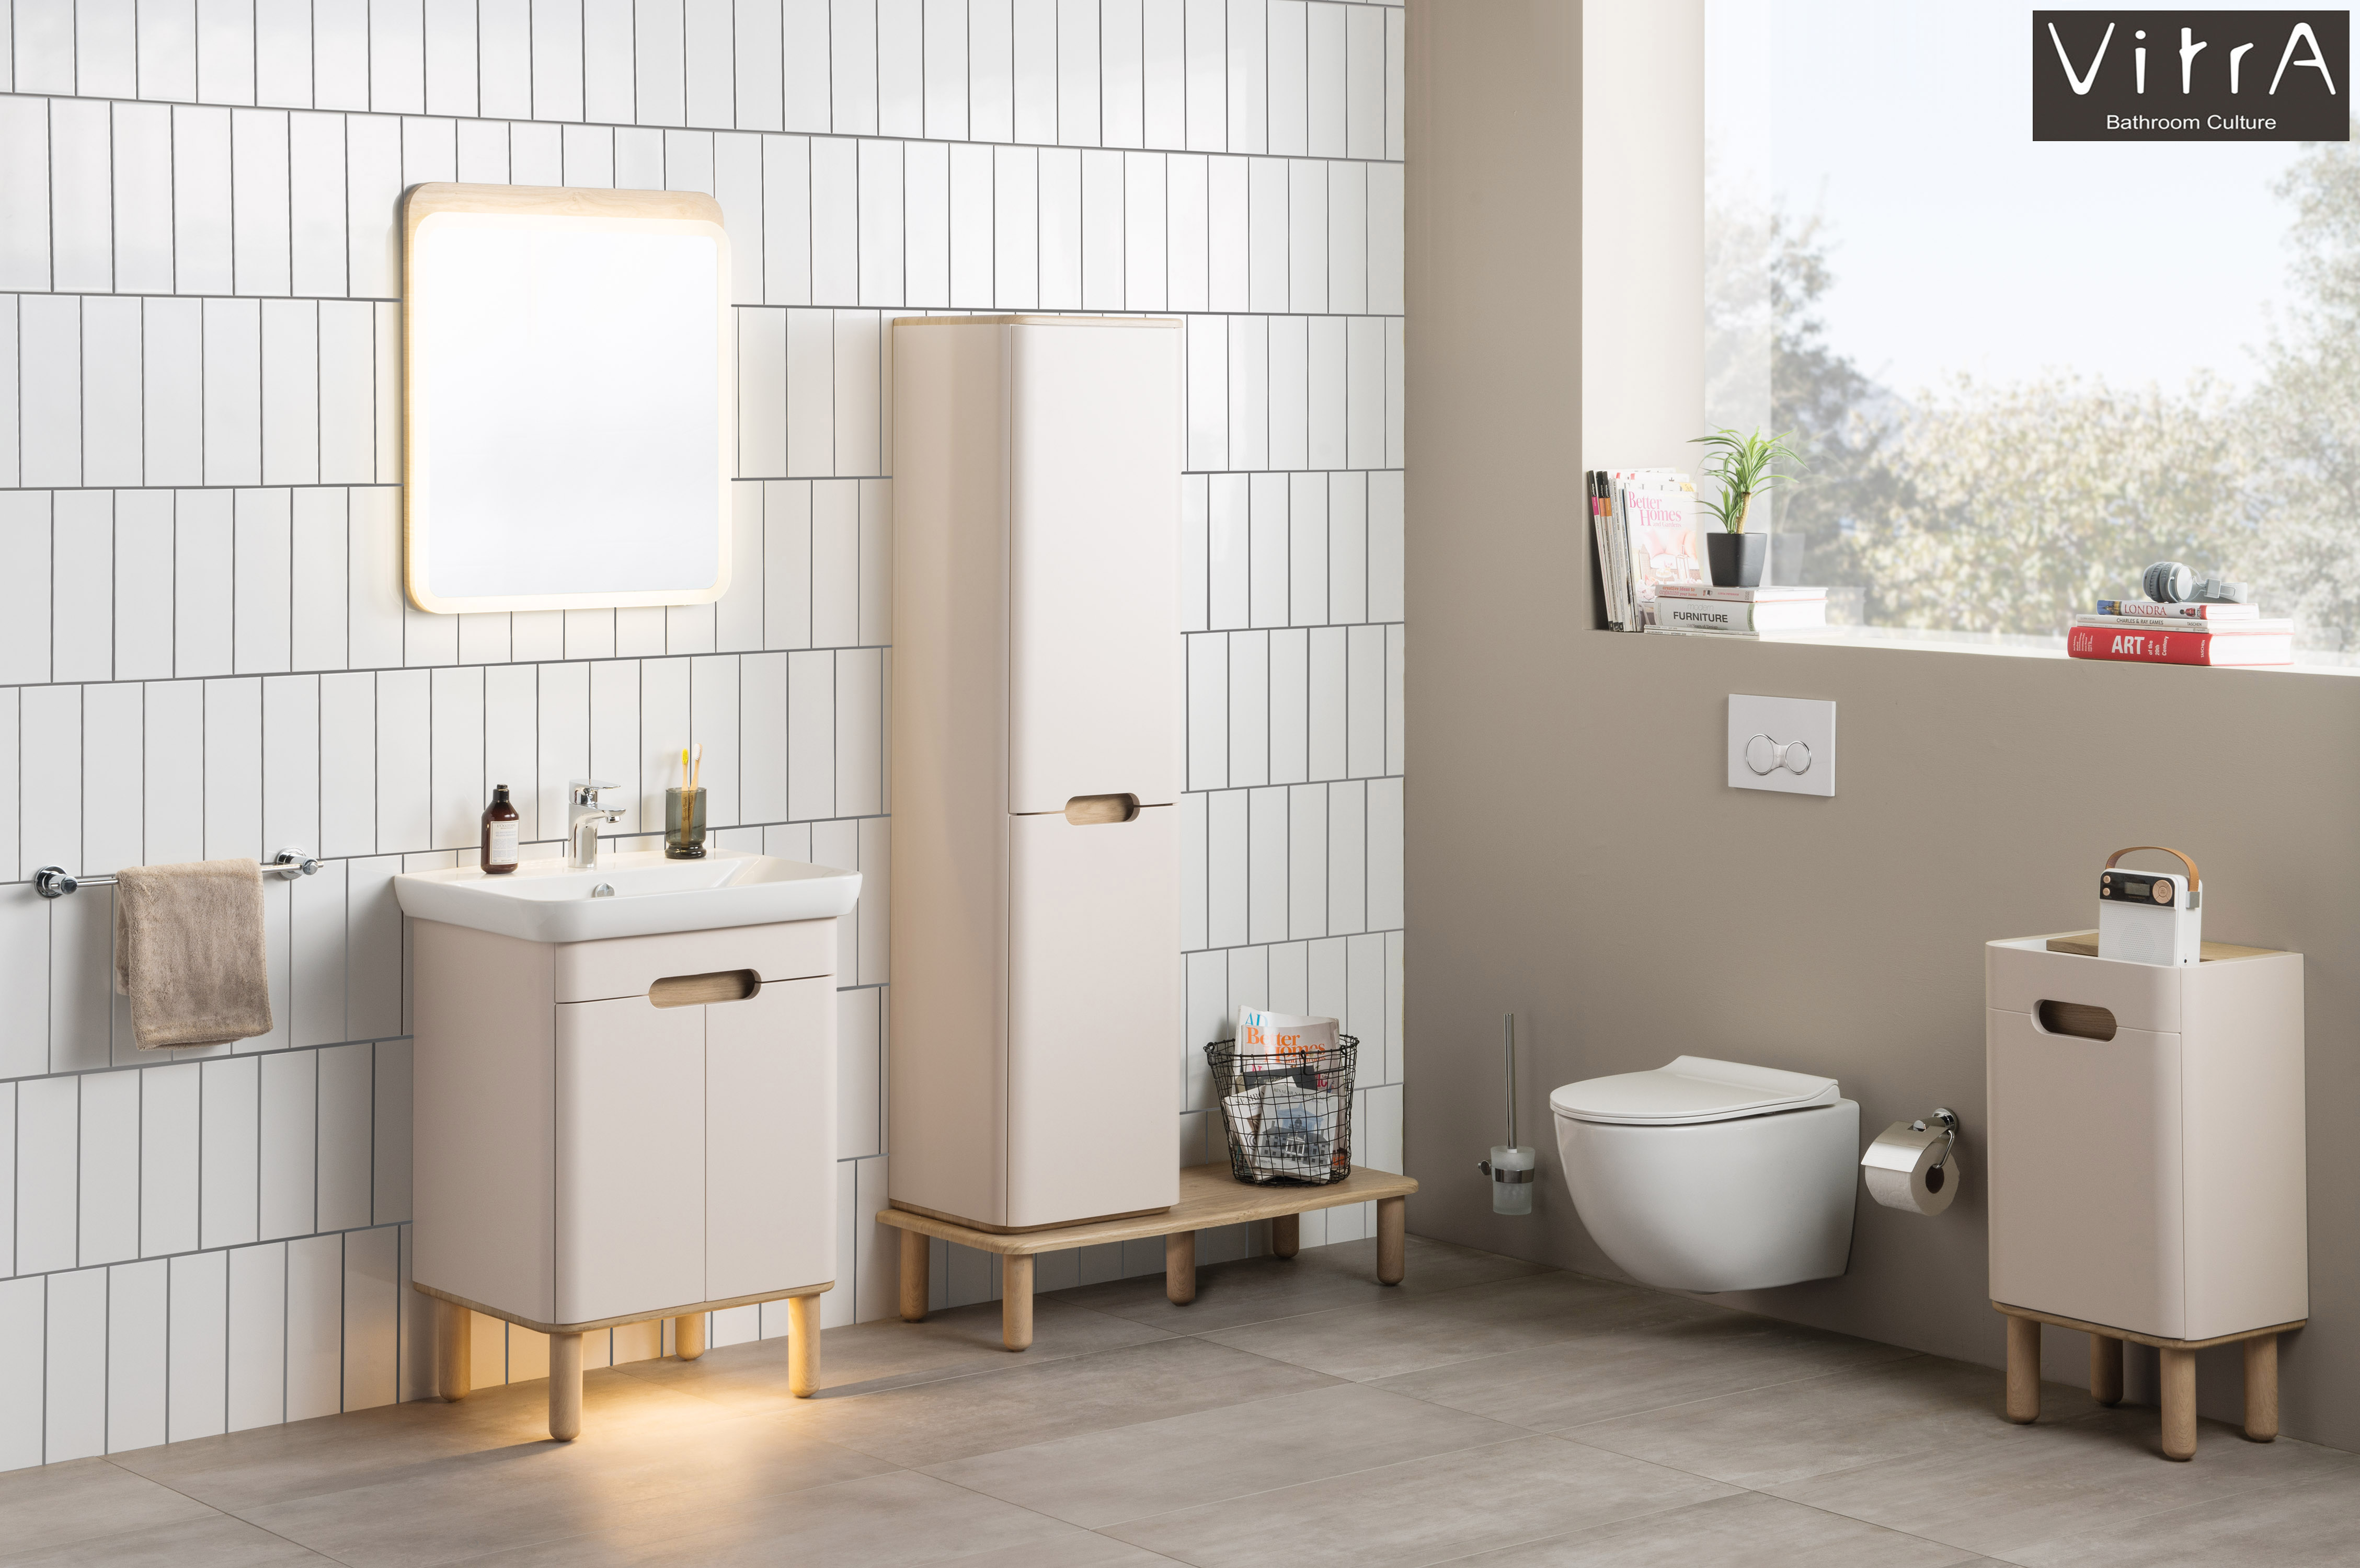 VitrA launches Sento WC with New Colour Options